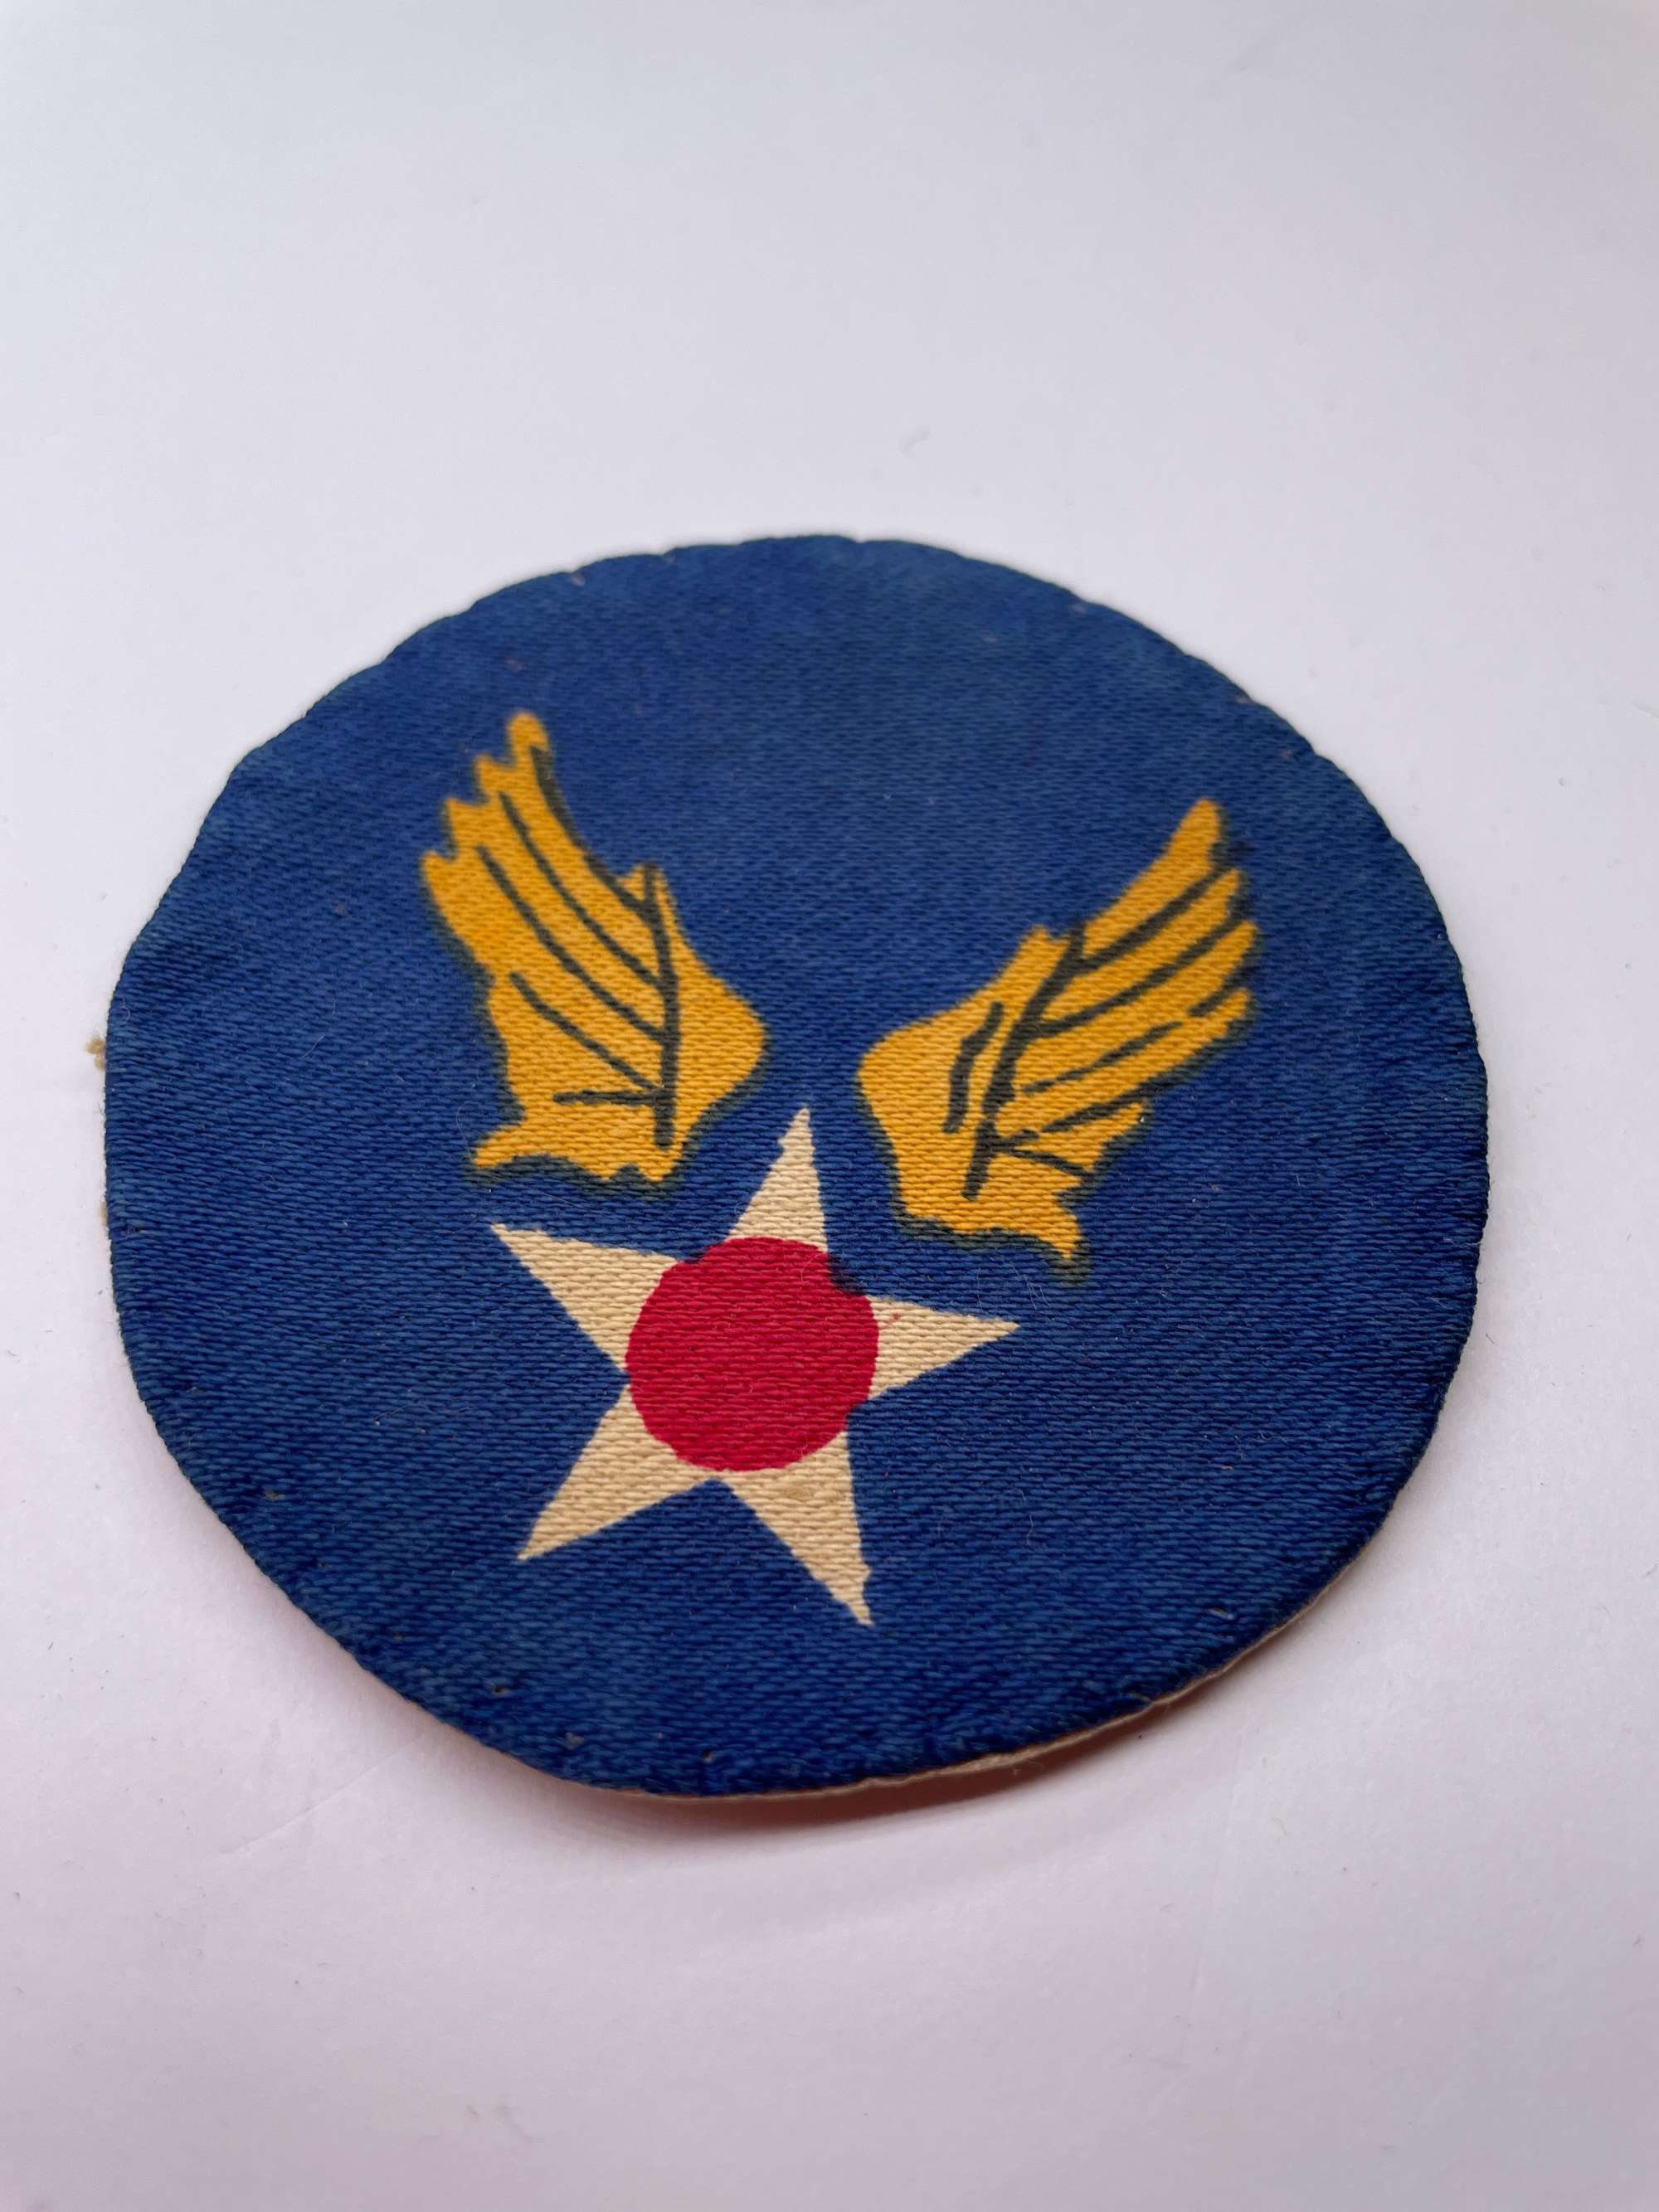 Original World War Two American Army Air Force Patch, Rubberised/Printed on Canvas